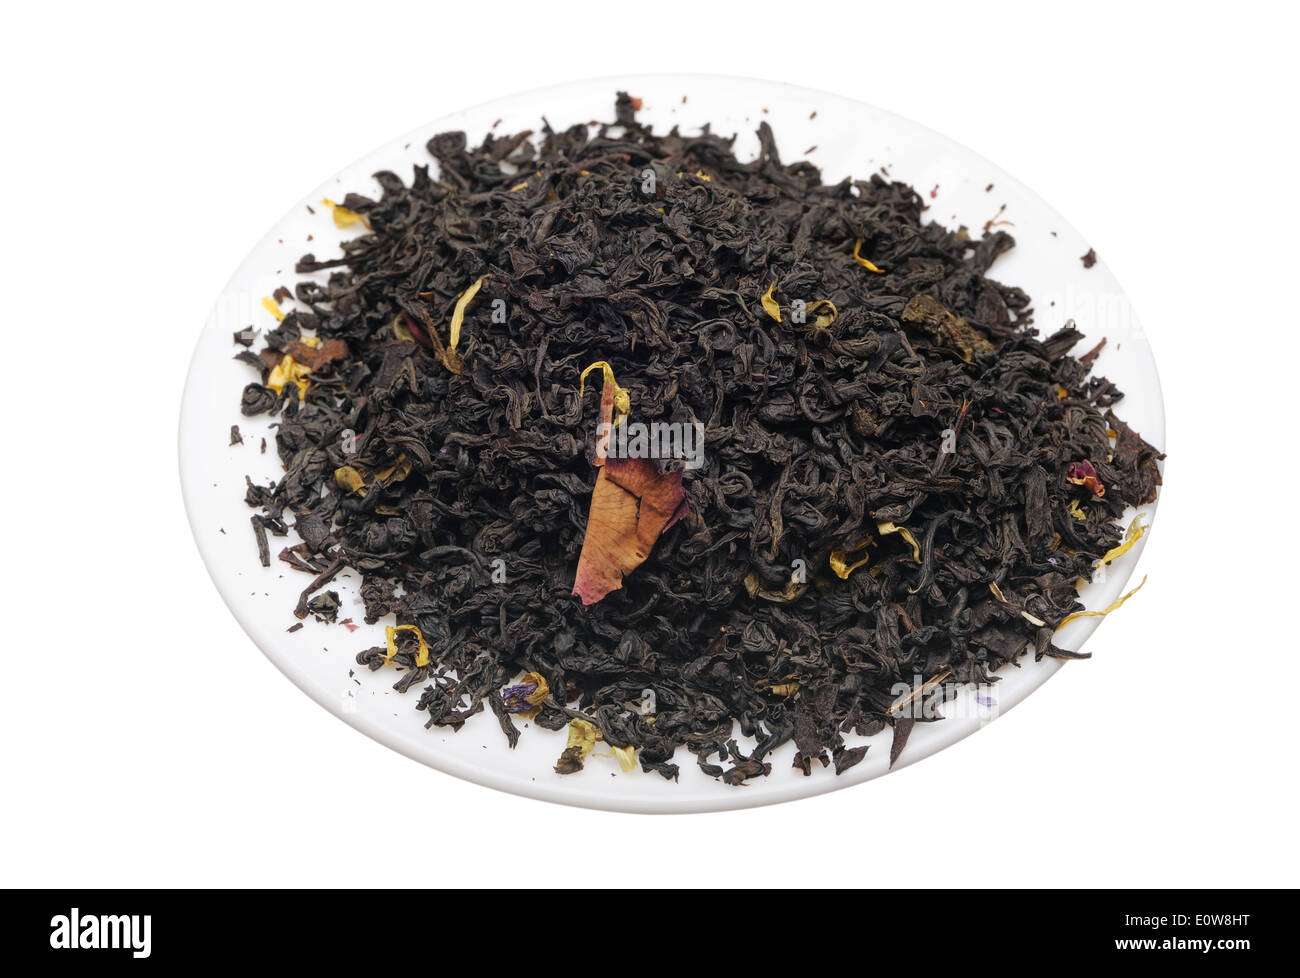 Black tea with flower petals and spices on a white background. Stock Photo